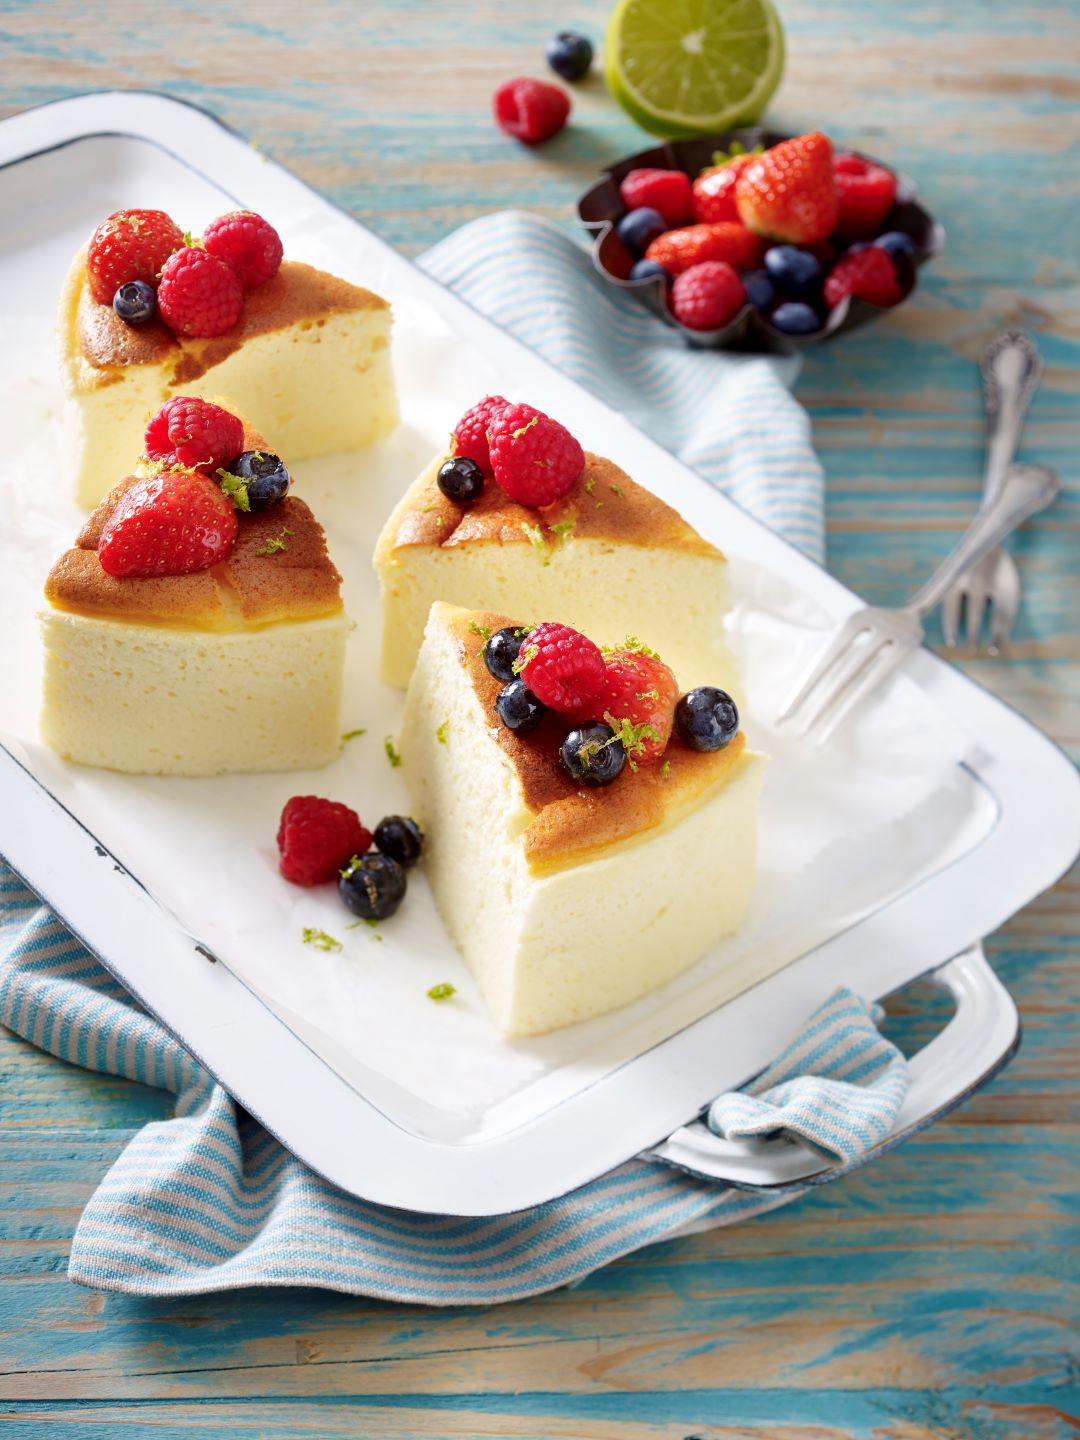 Light Soufflé Cheesecake with Berries